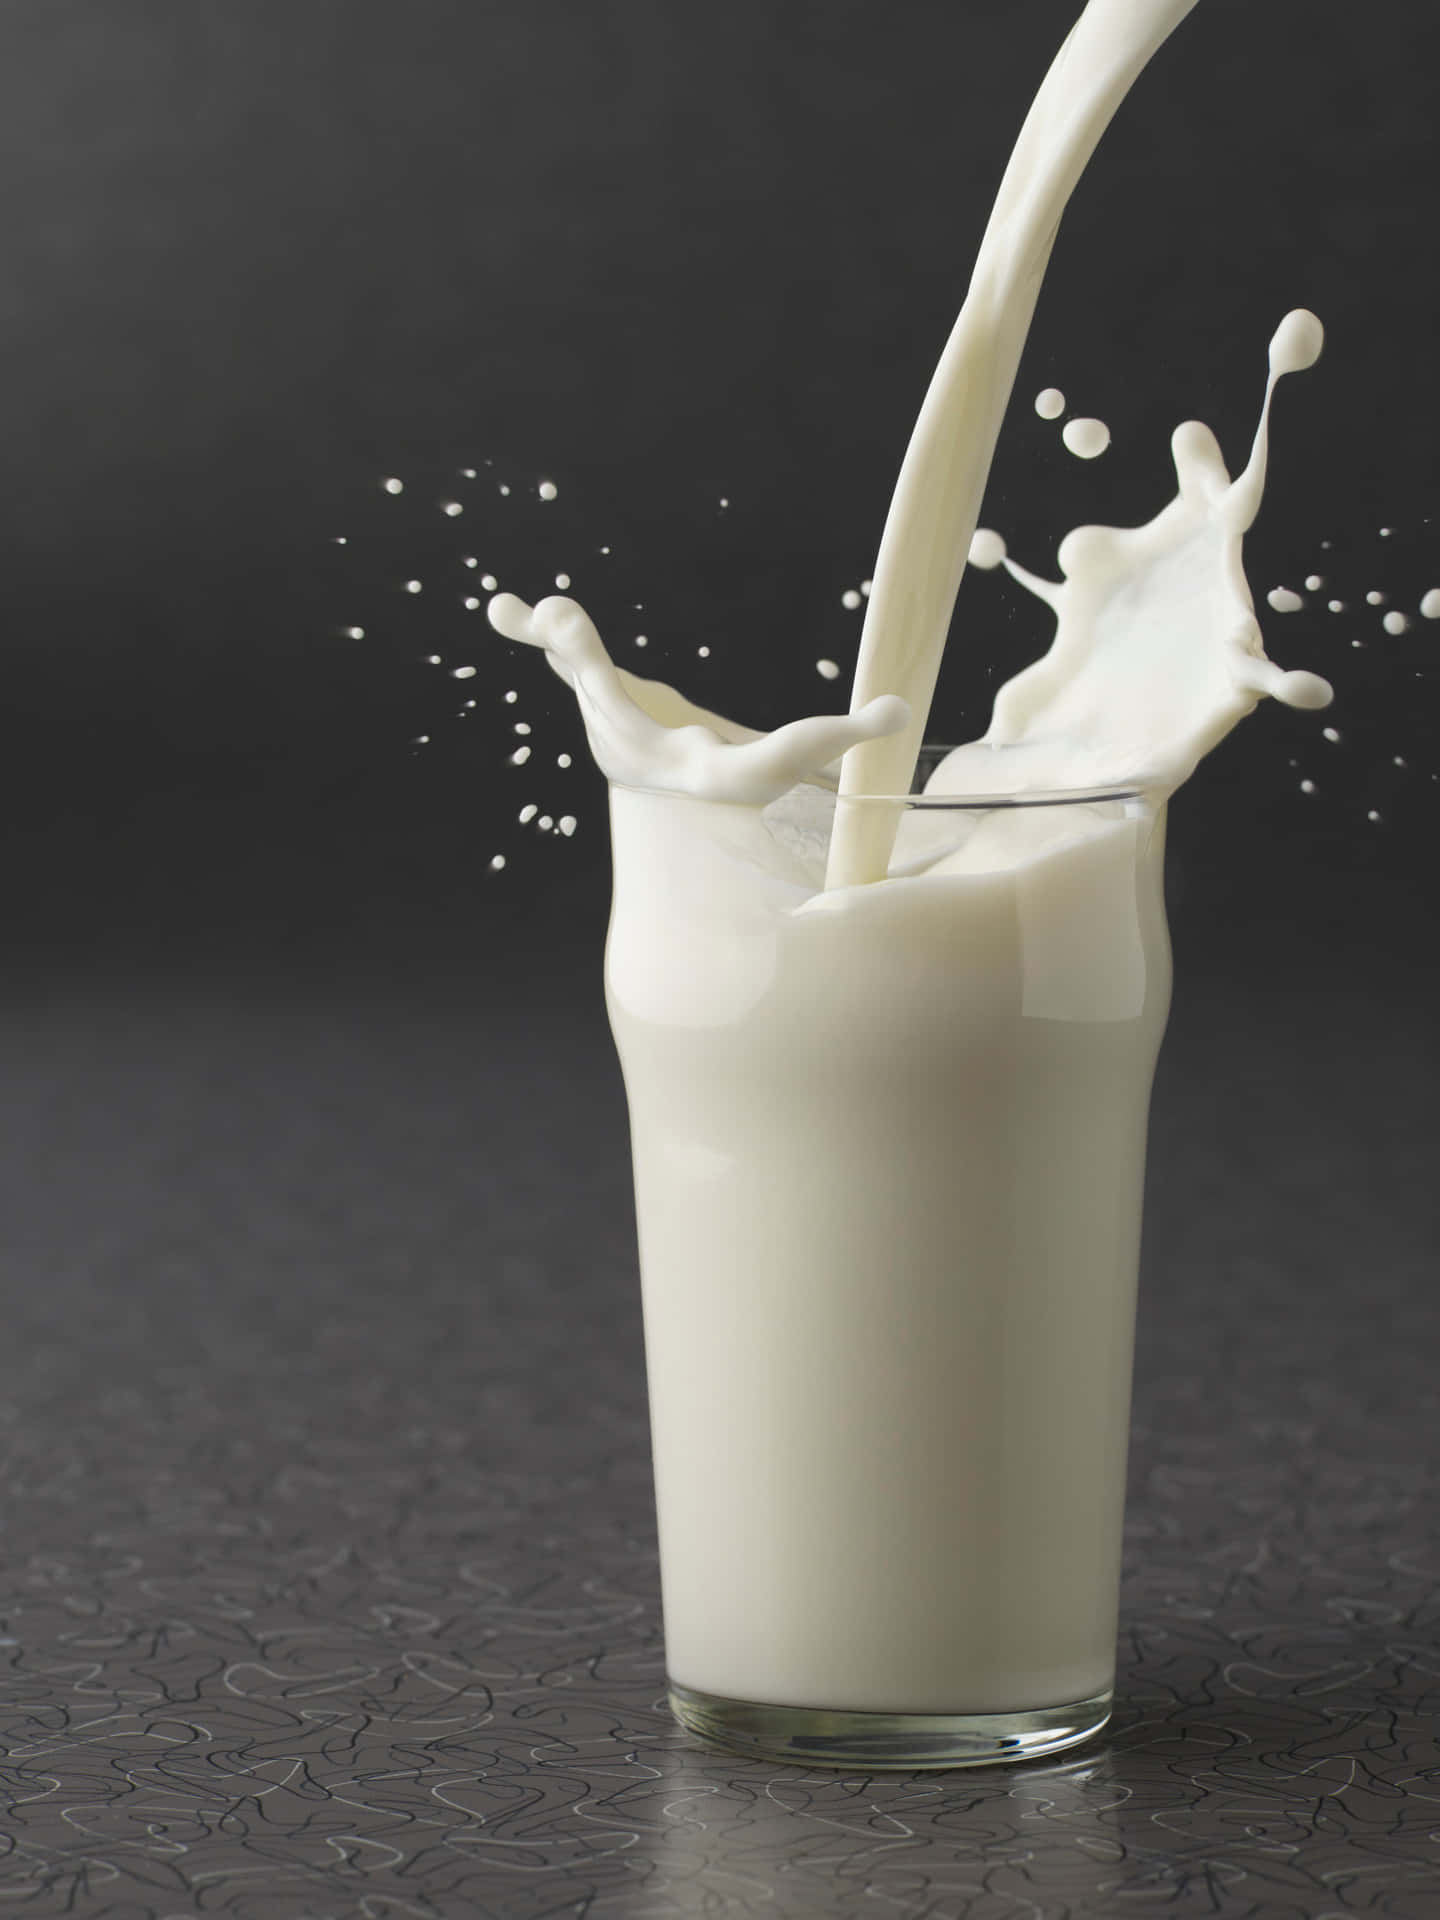 A Glass Of Milk Is Being Poured Into A Glass